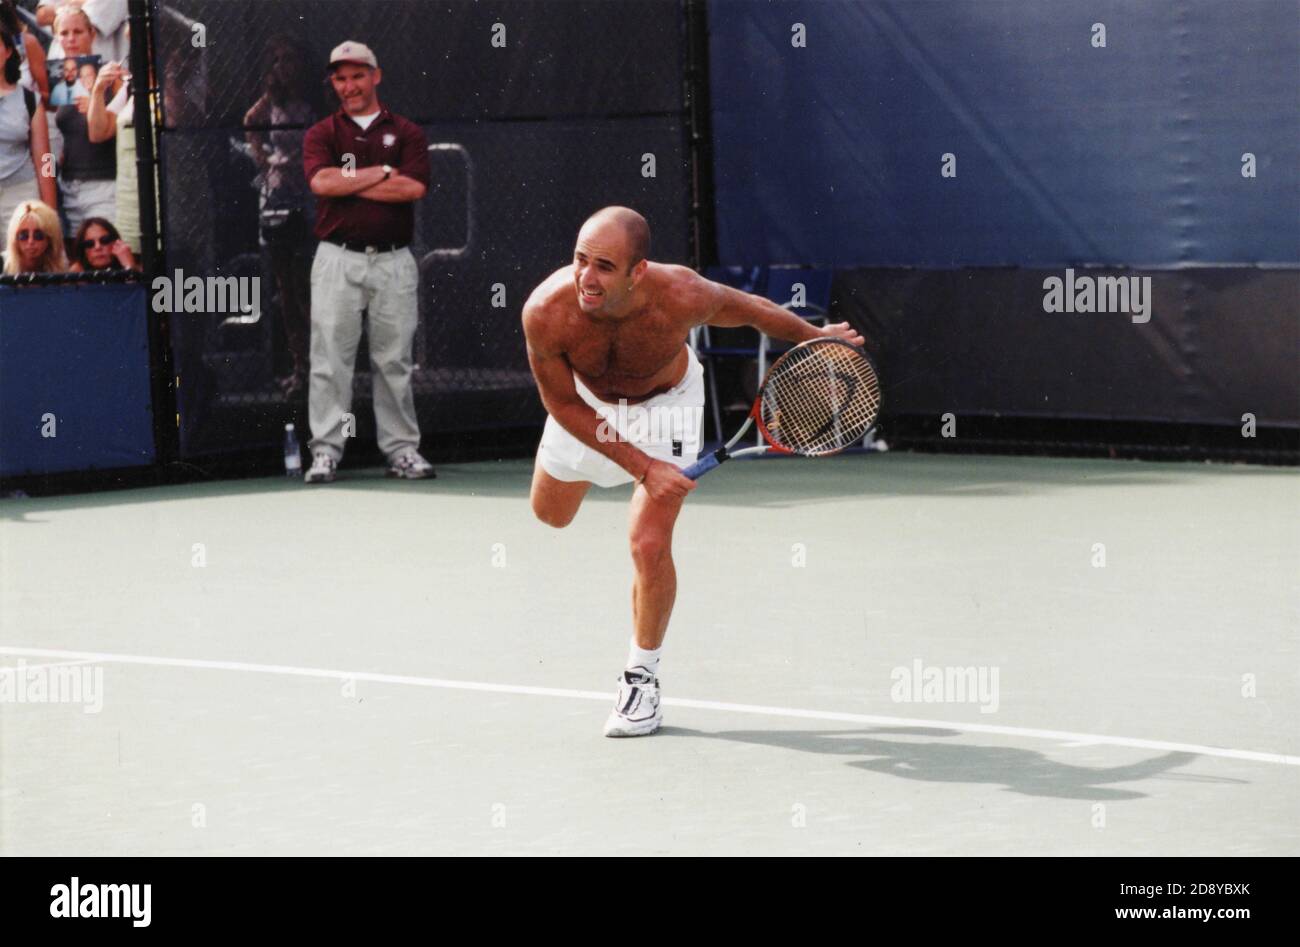 American tennis player Andre Agassi playing at the US Open, New York, USA 1999 Stock Photo